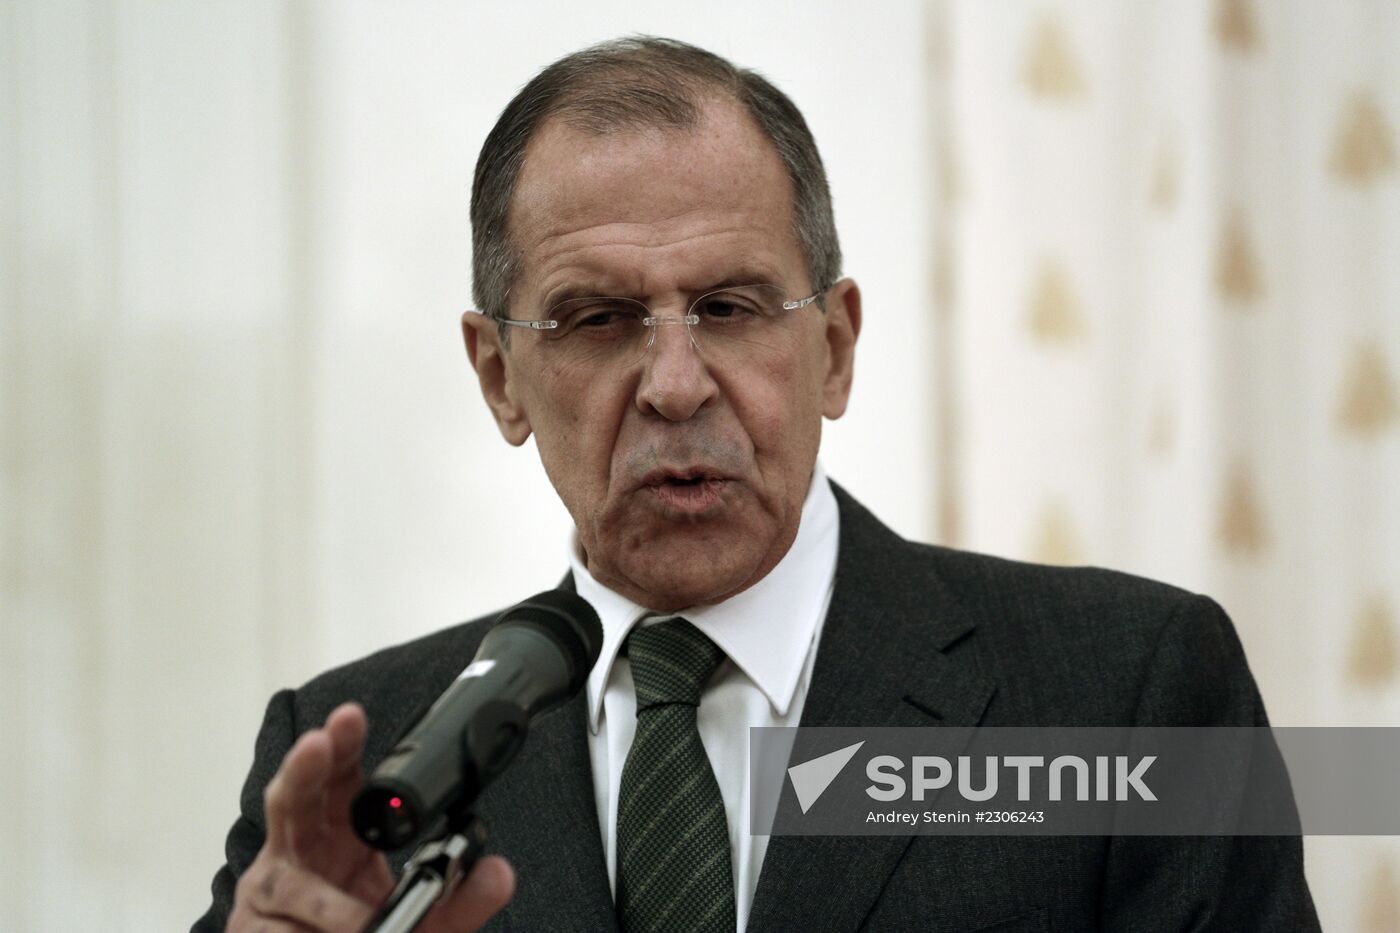 Sergei Lavrov speaks at official event at Russian Foreign Ministry office